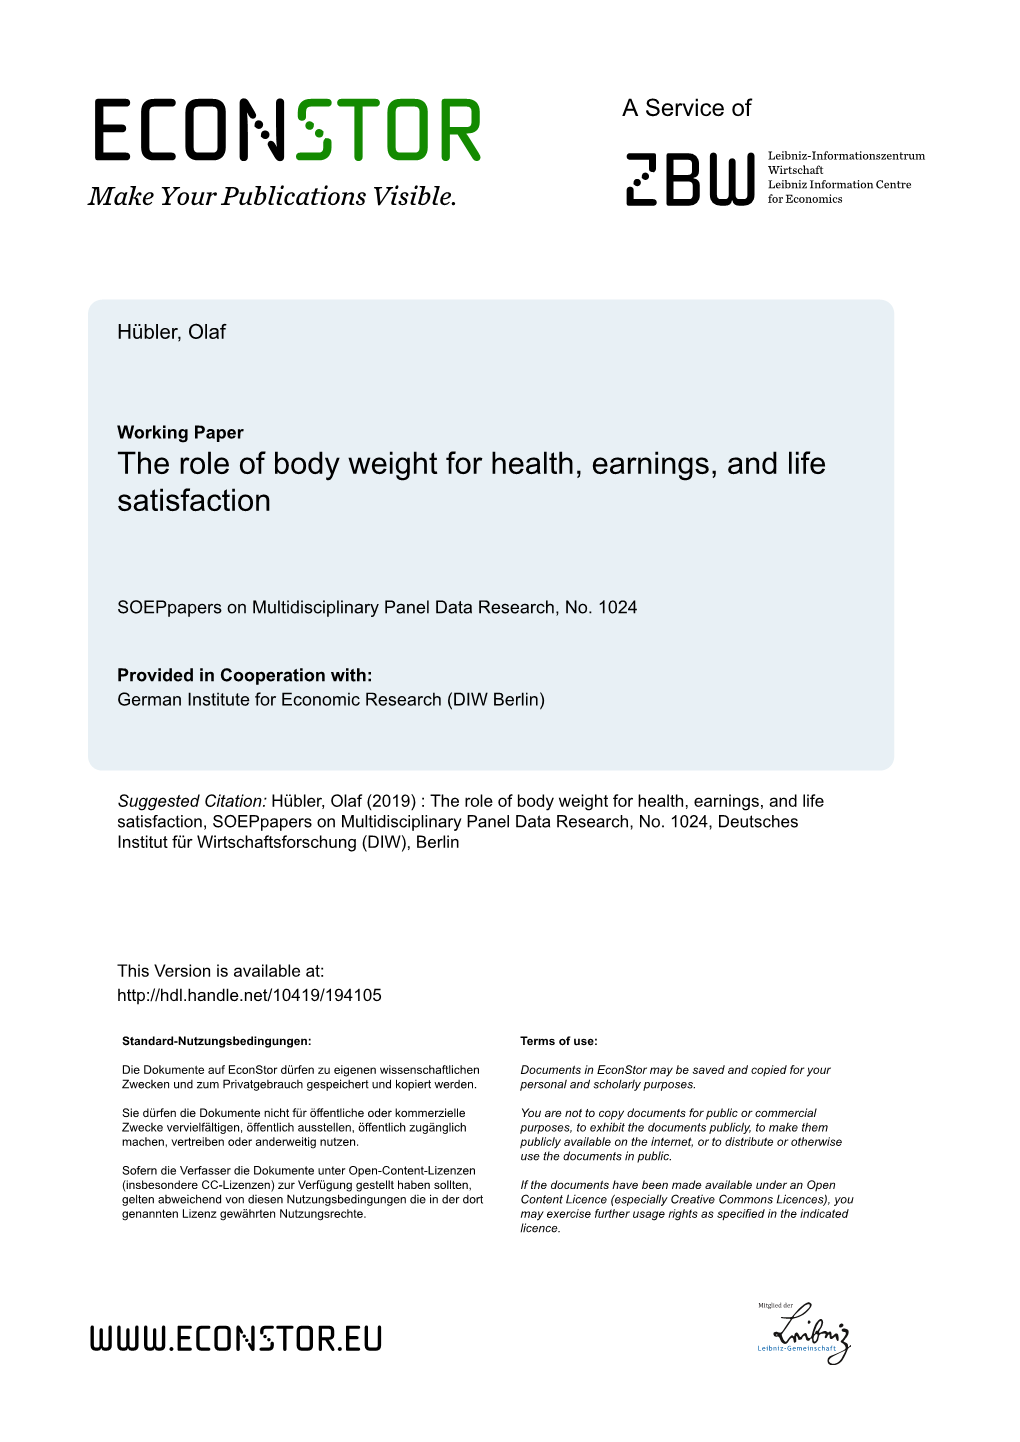 The Role of Body Weight for Health, Earnings, and Life Satisfaction